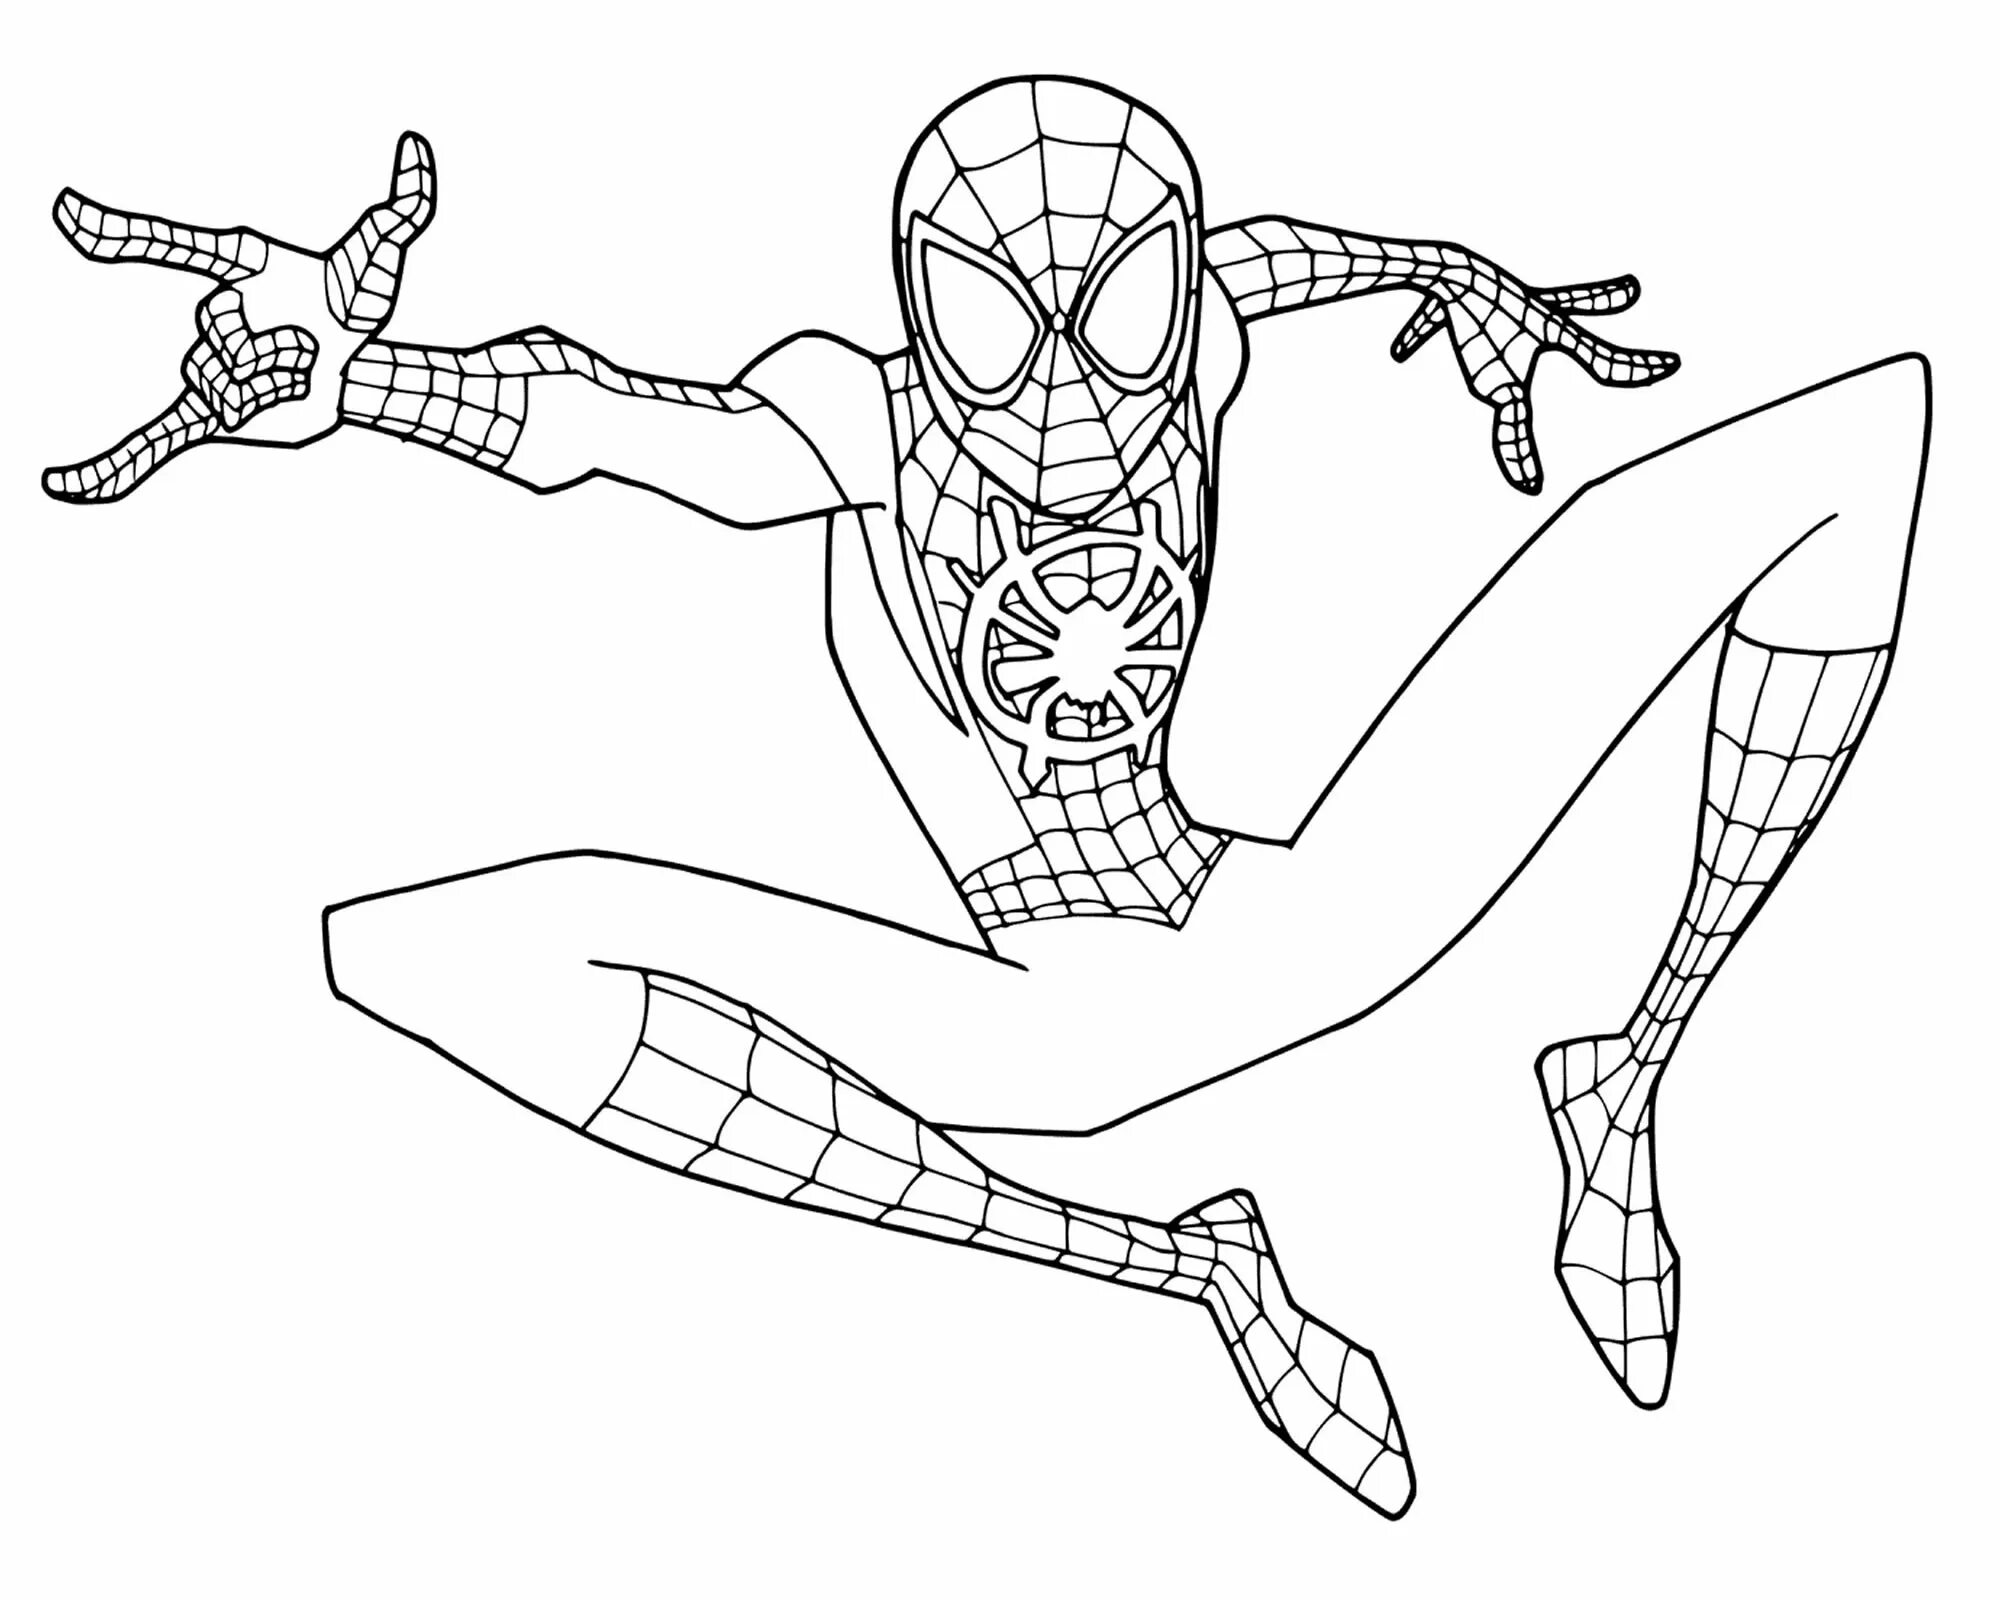 Incredible Spider-Man coloring book for kids